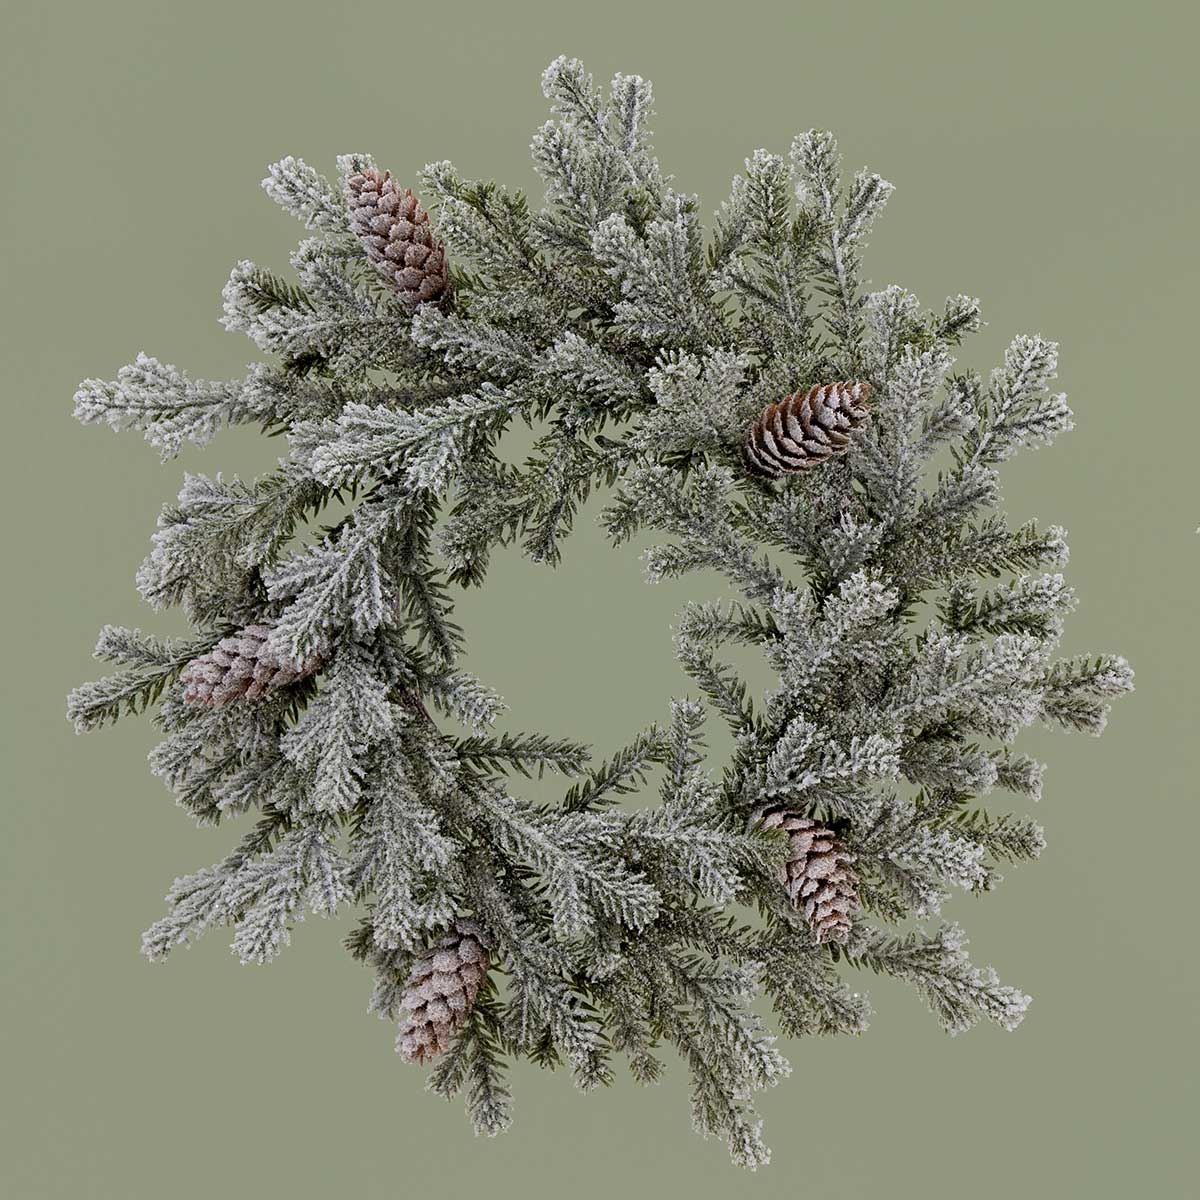 MINI WREATH FROSTED EVERGREEN 14IN (INNER RING 5.5IN) GREEN